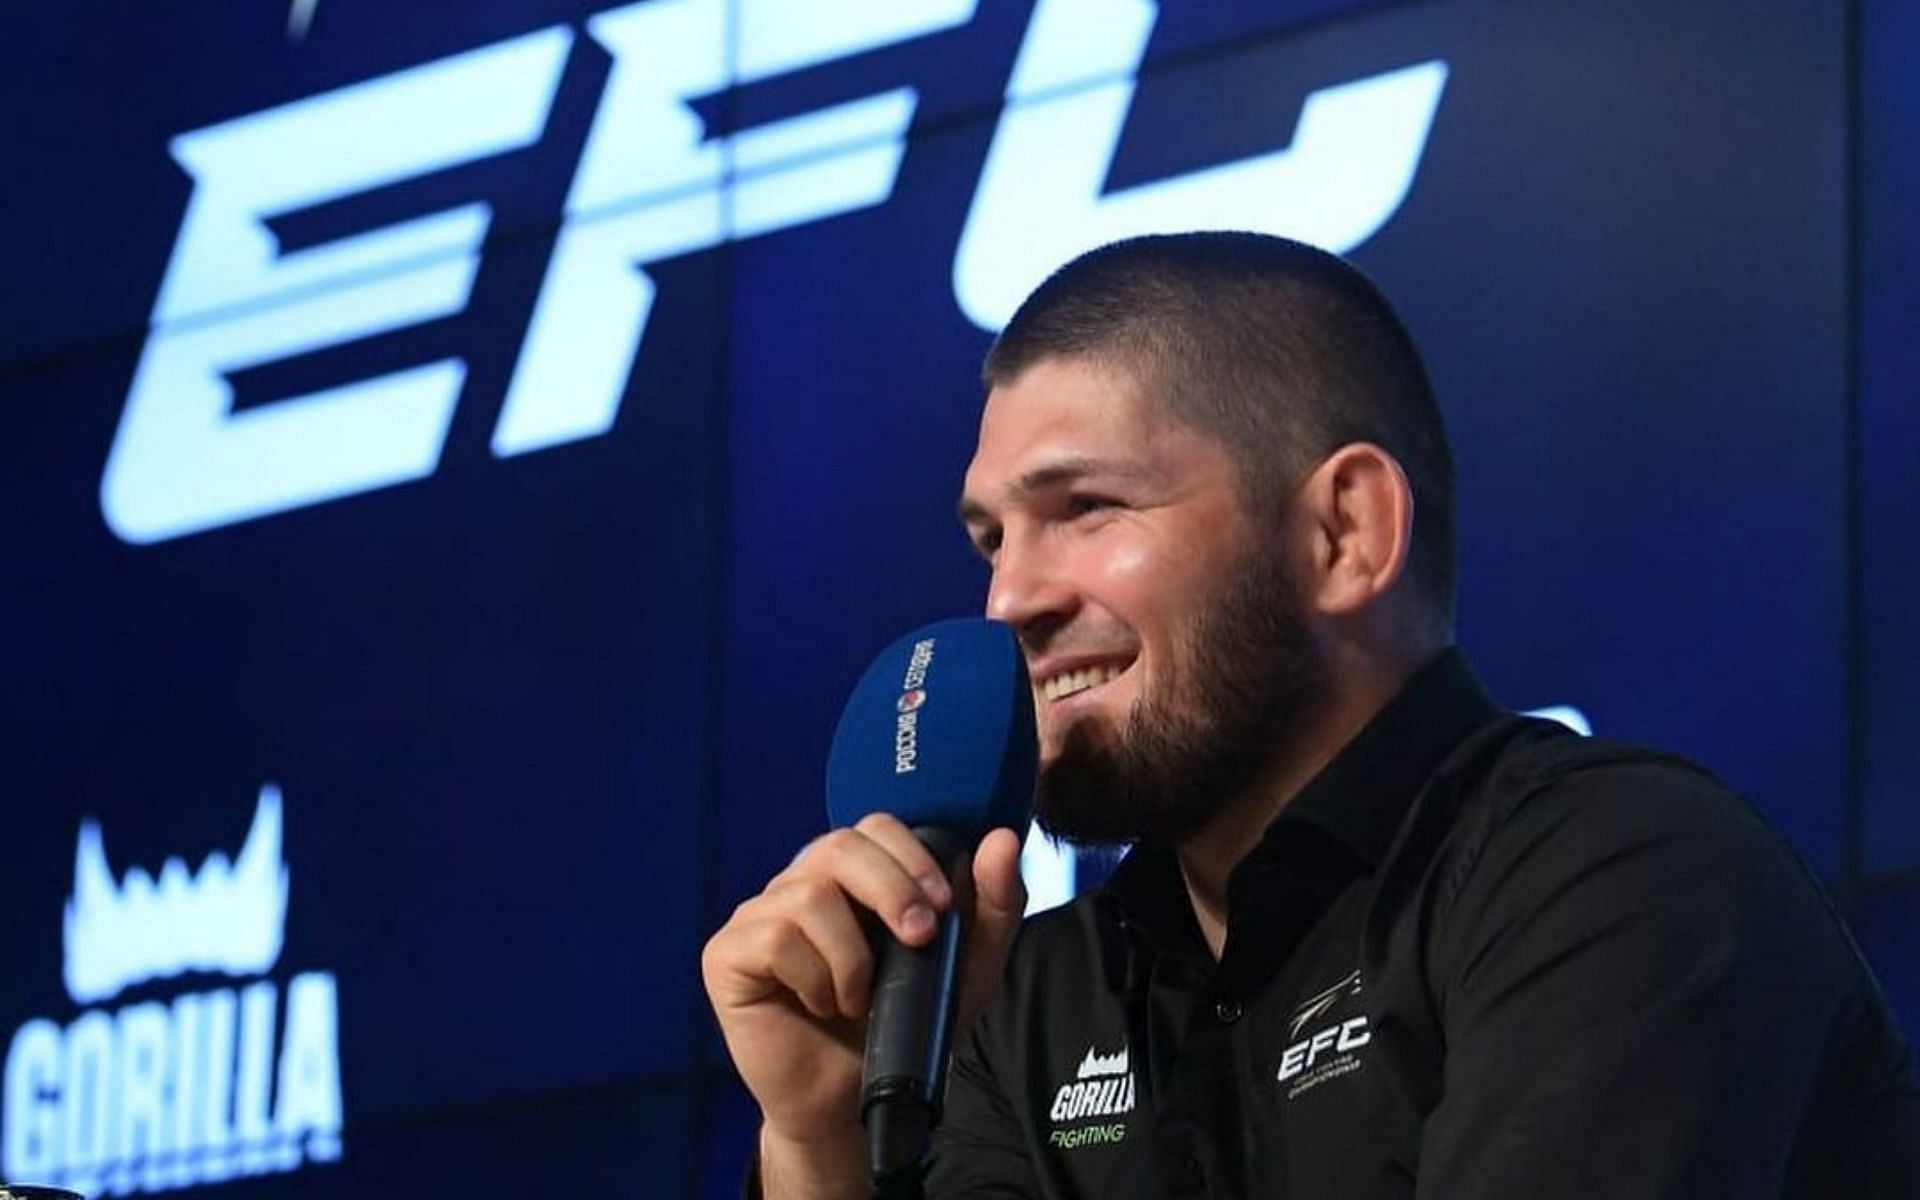 Khabib Nurmagomedov is the co-owner of Russian MMA promotion Eagle FC